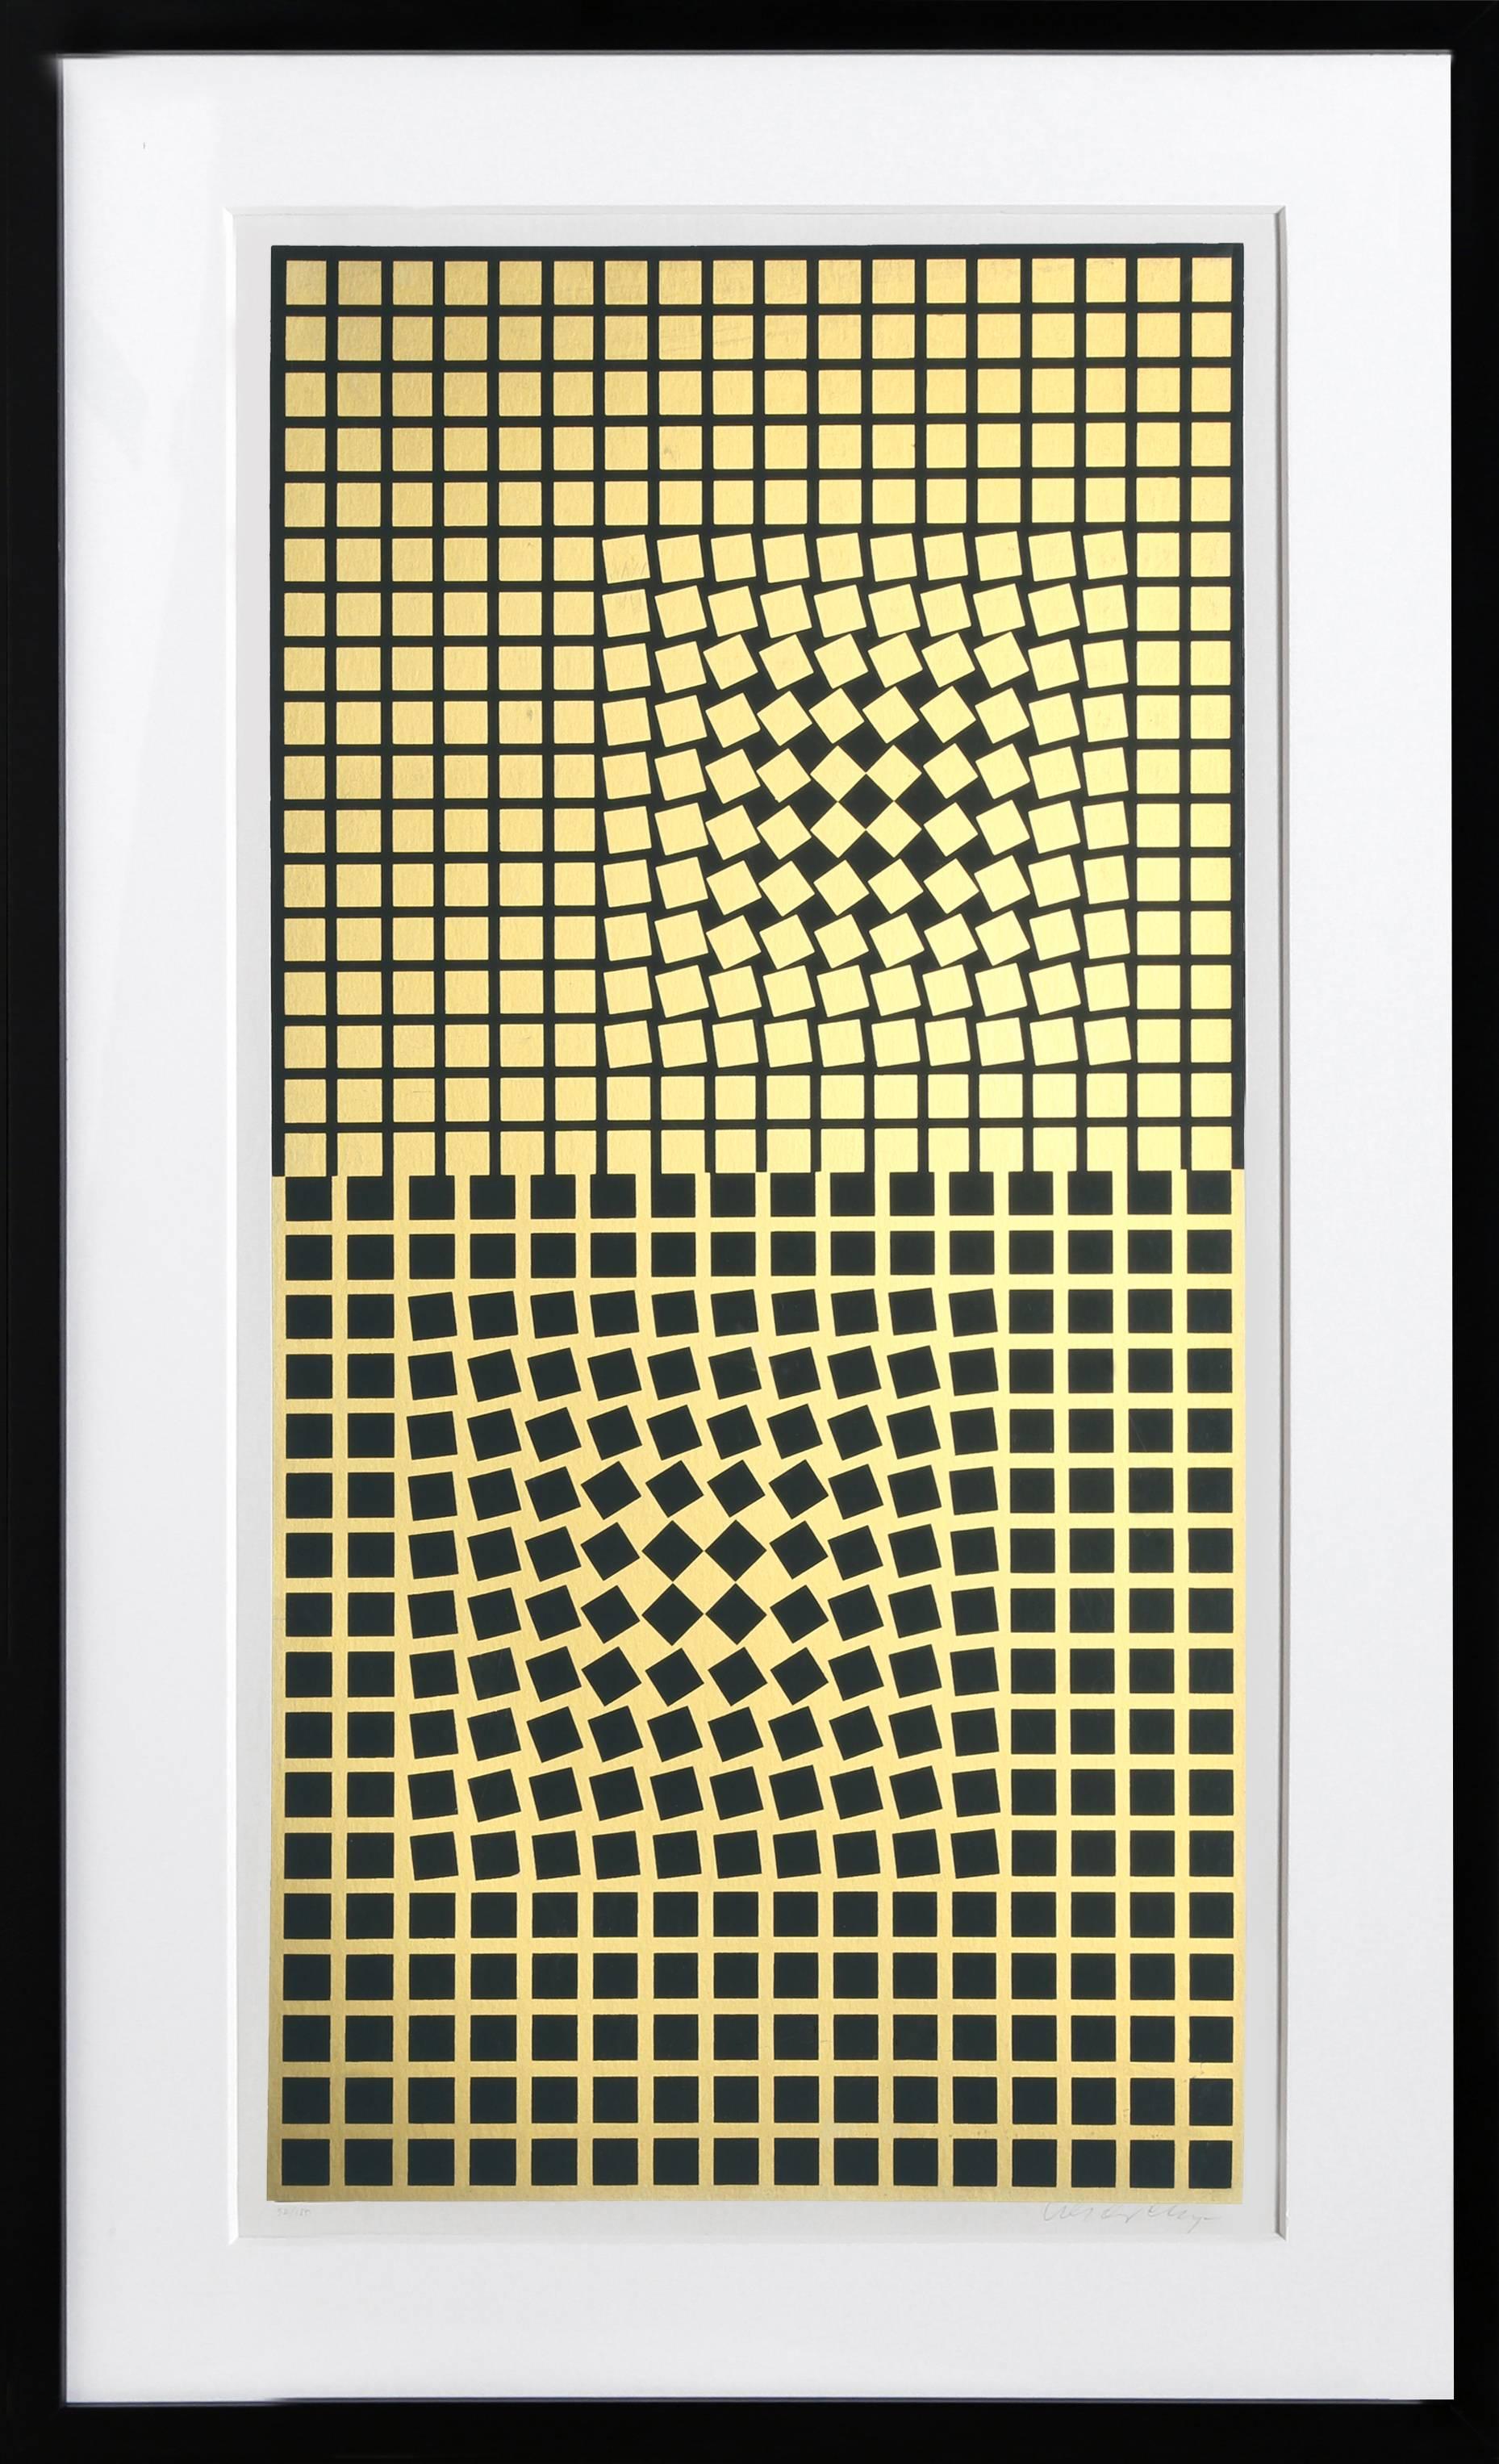 This print comes from the Constellations portfolio, printed by Vasarely with Galerie Denise René, Paris in 1967. Vasarely is by far one of the world's most influential Optical artists, pushing the boundaries of art and playing with the visual field